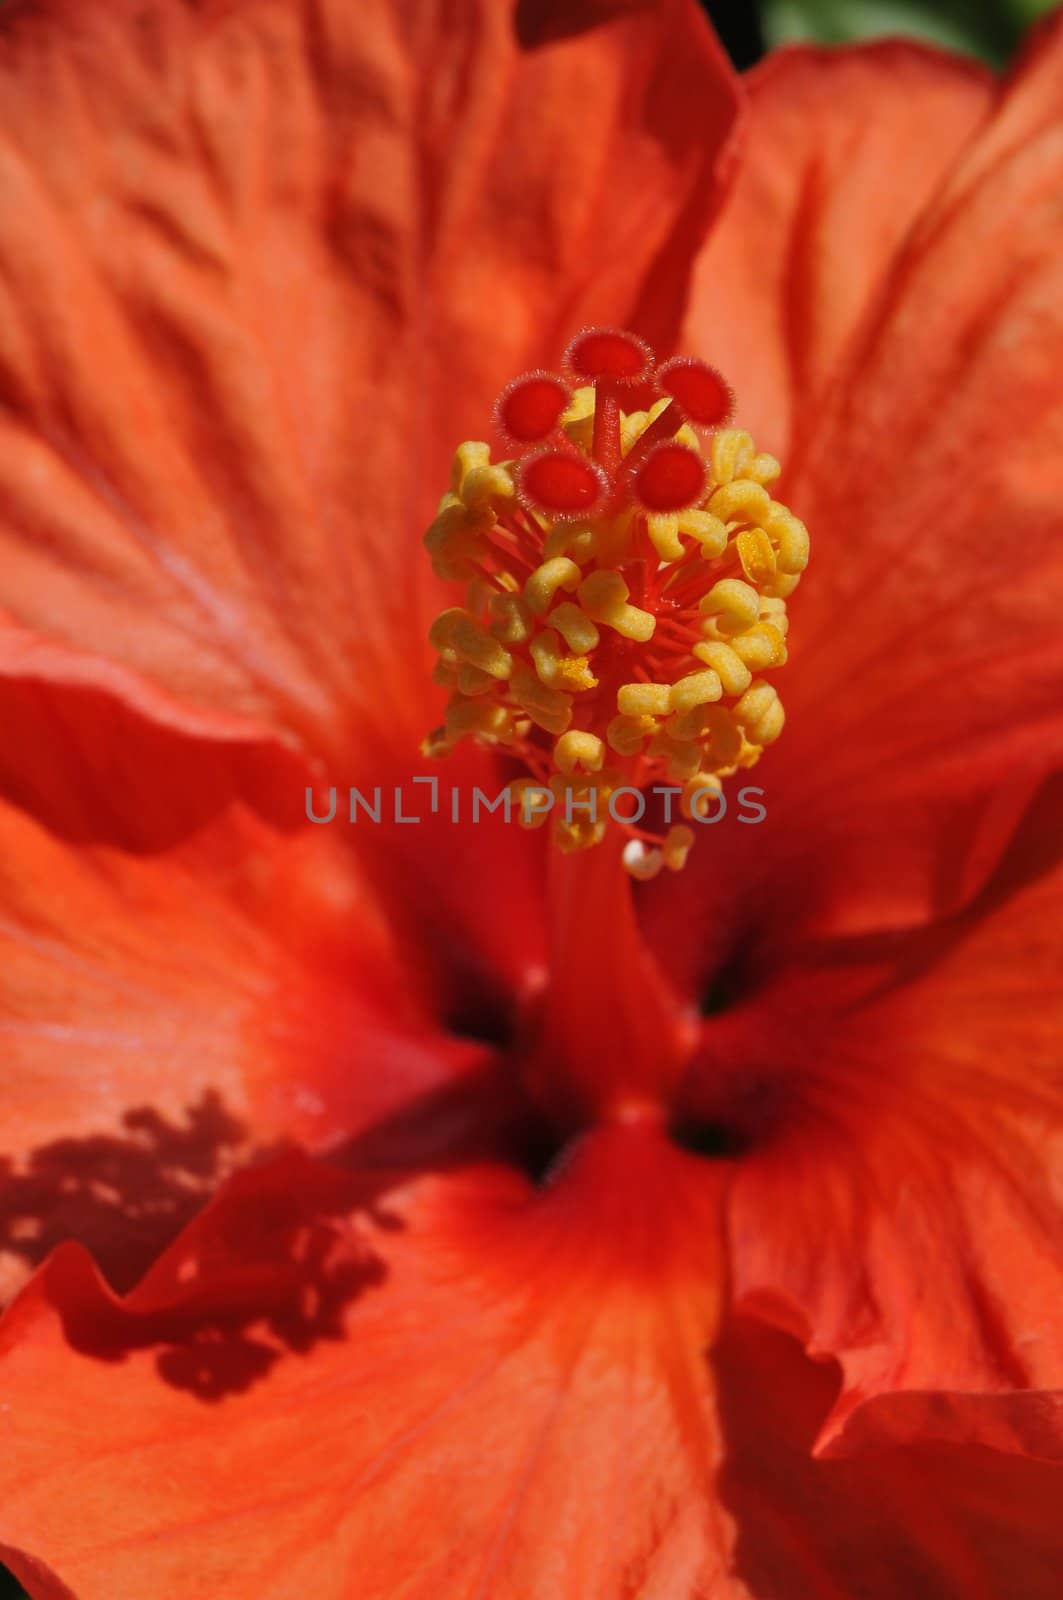 Big close-up on pistil of an hibiscus flower by shkyo30